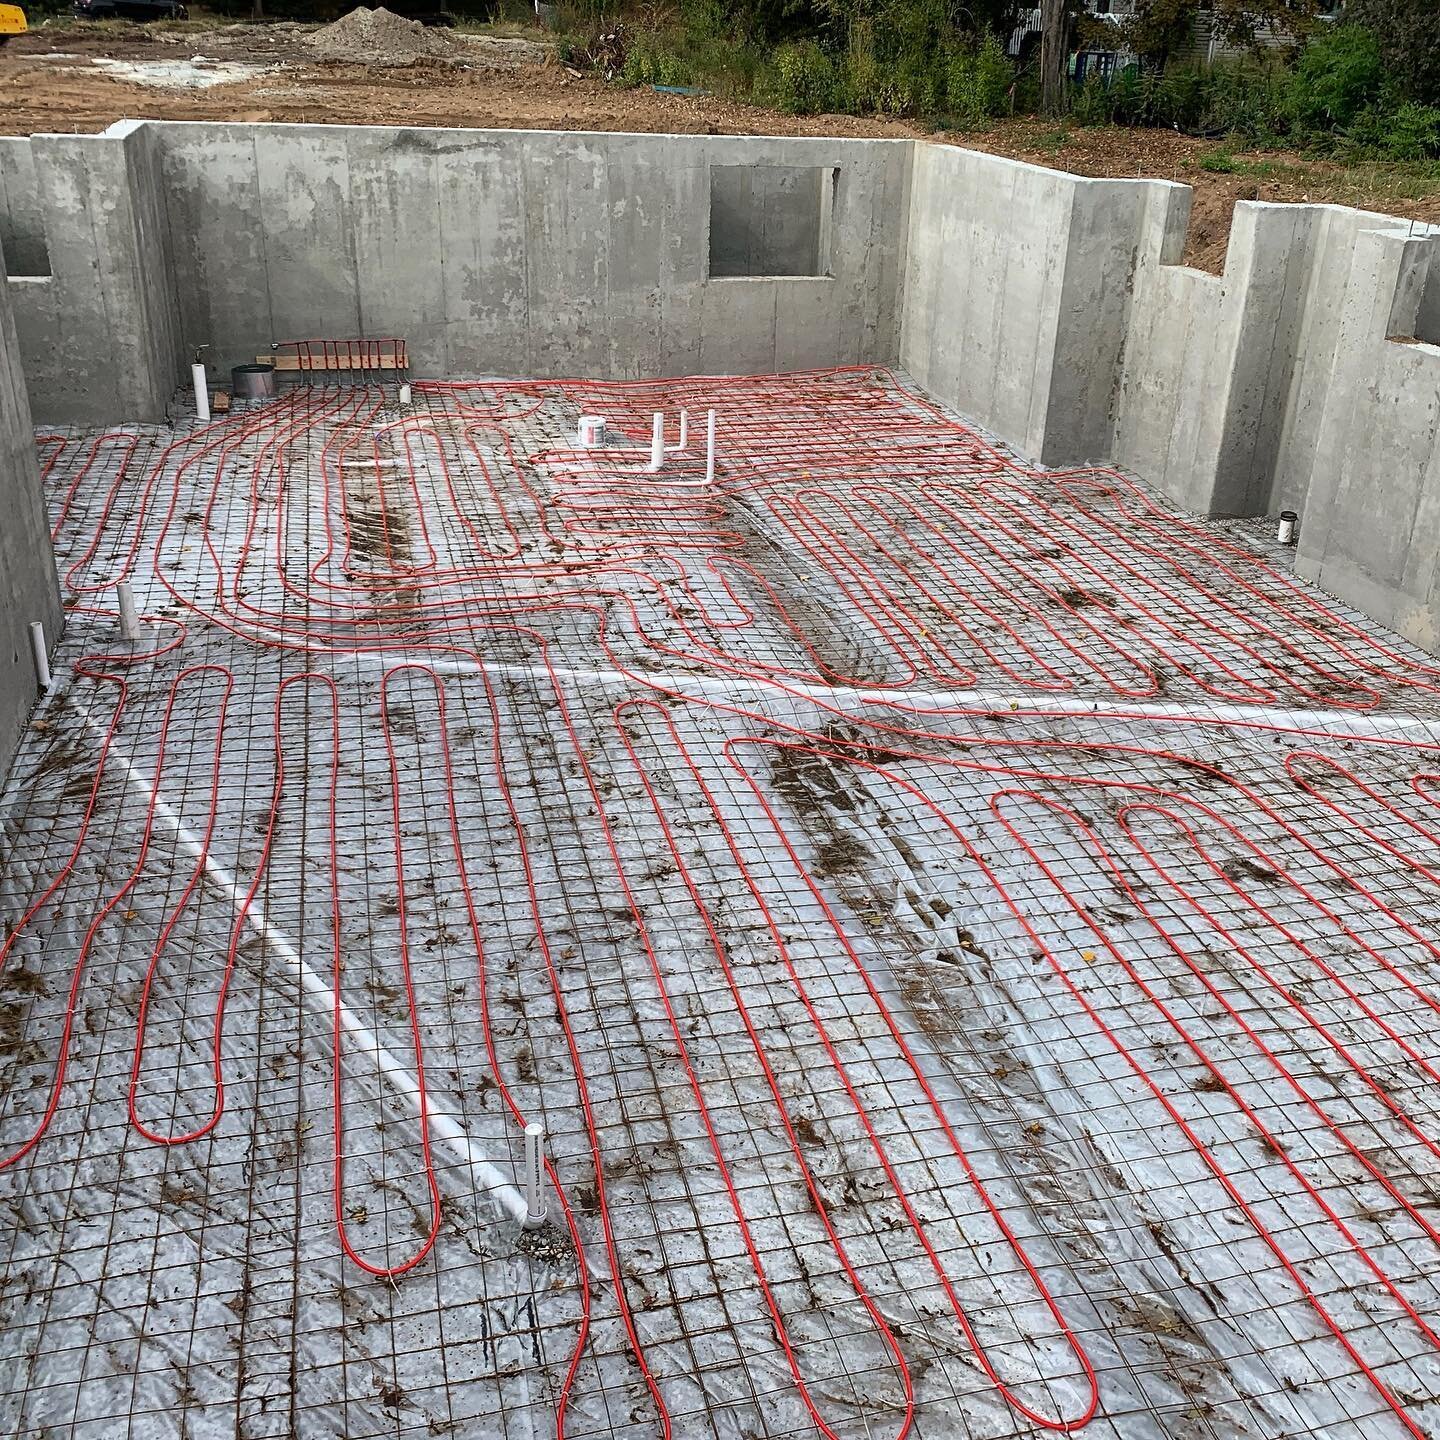 Radiant heat systems are known to be energy efficient, quiet, hypoallergenic and space saving, so you don&rsquo;t compromise interior design factors in your home with bulky baseboard. 
Pictured is our installation of radiant heat on a basement slab. 